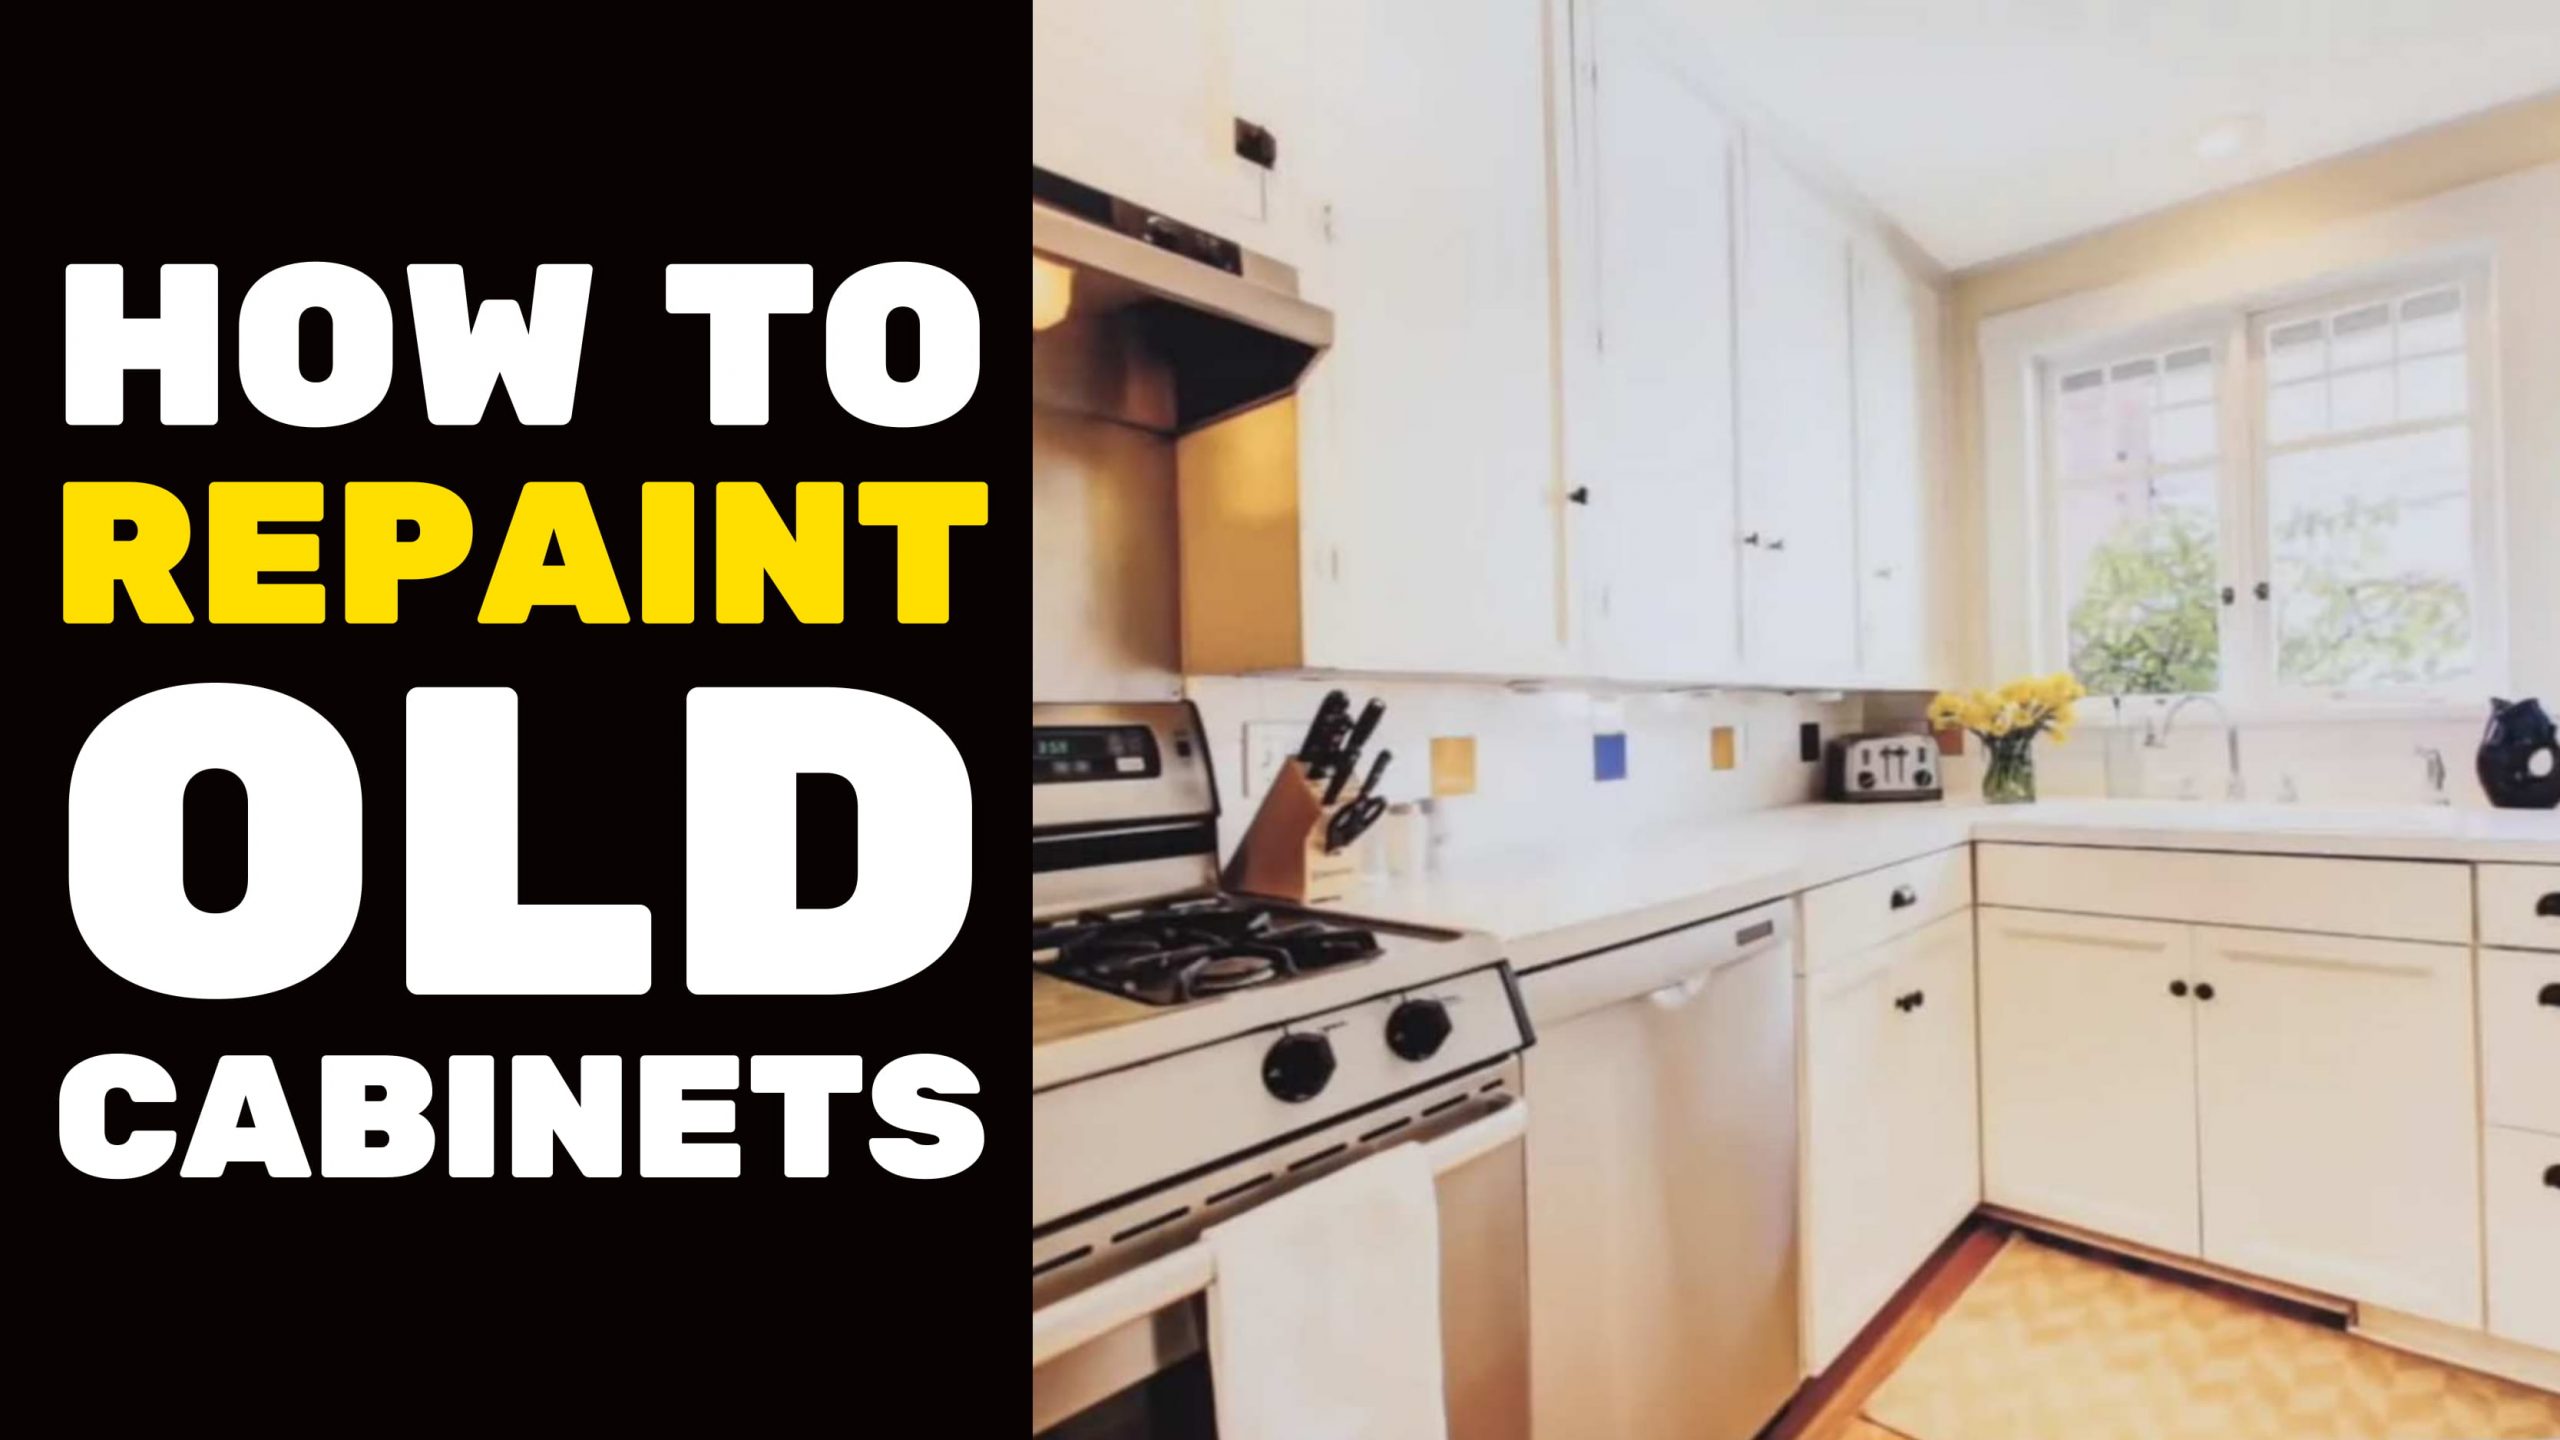 BASEMENT FINISHING COURSE VIDEO: How to Repaint Old Cabinets